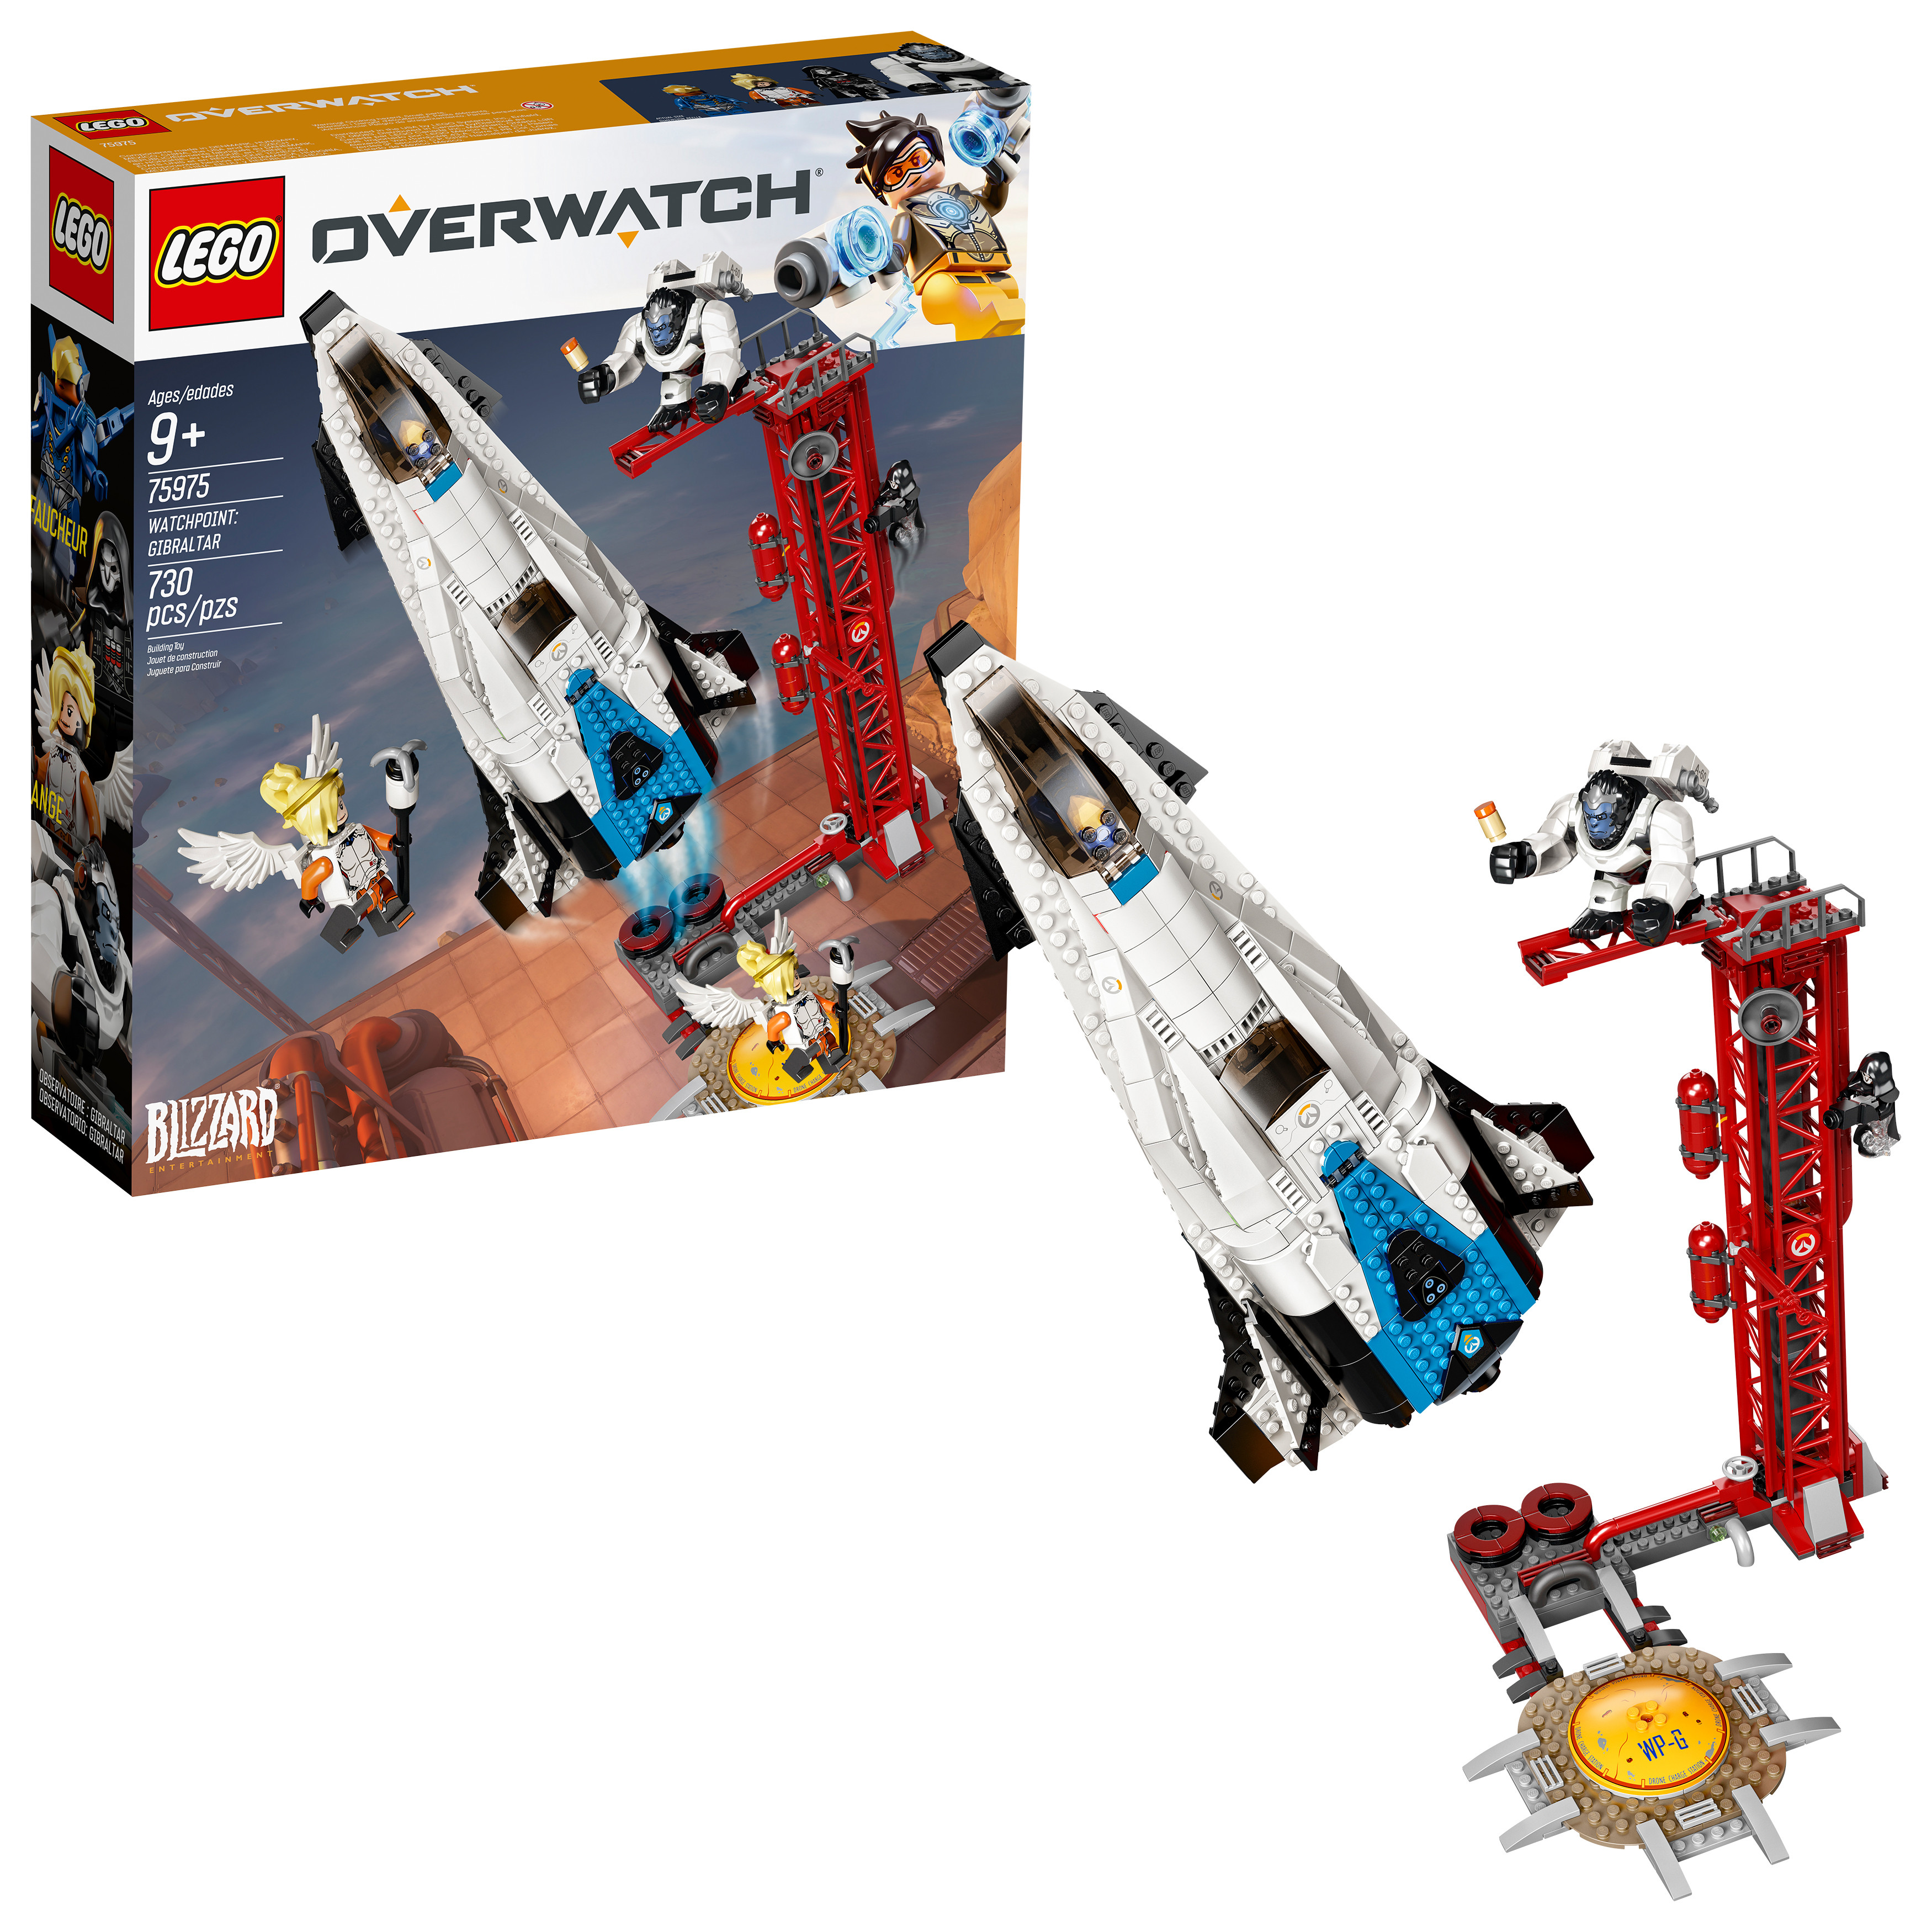 EXTRA:
Could not resist showing this here, LEGO made a set featuring the rocket I worked on! :D